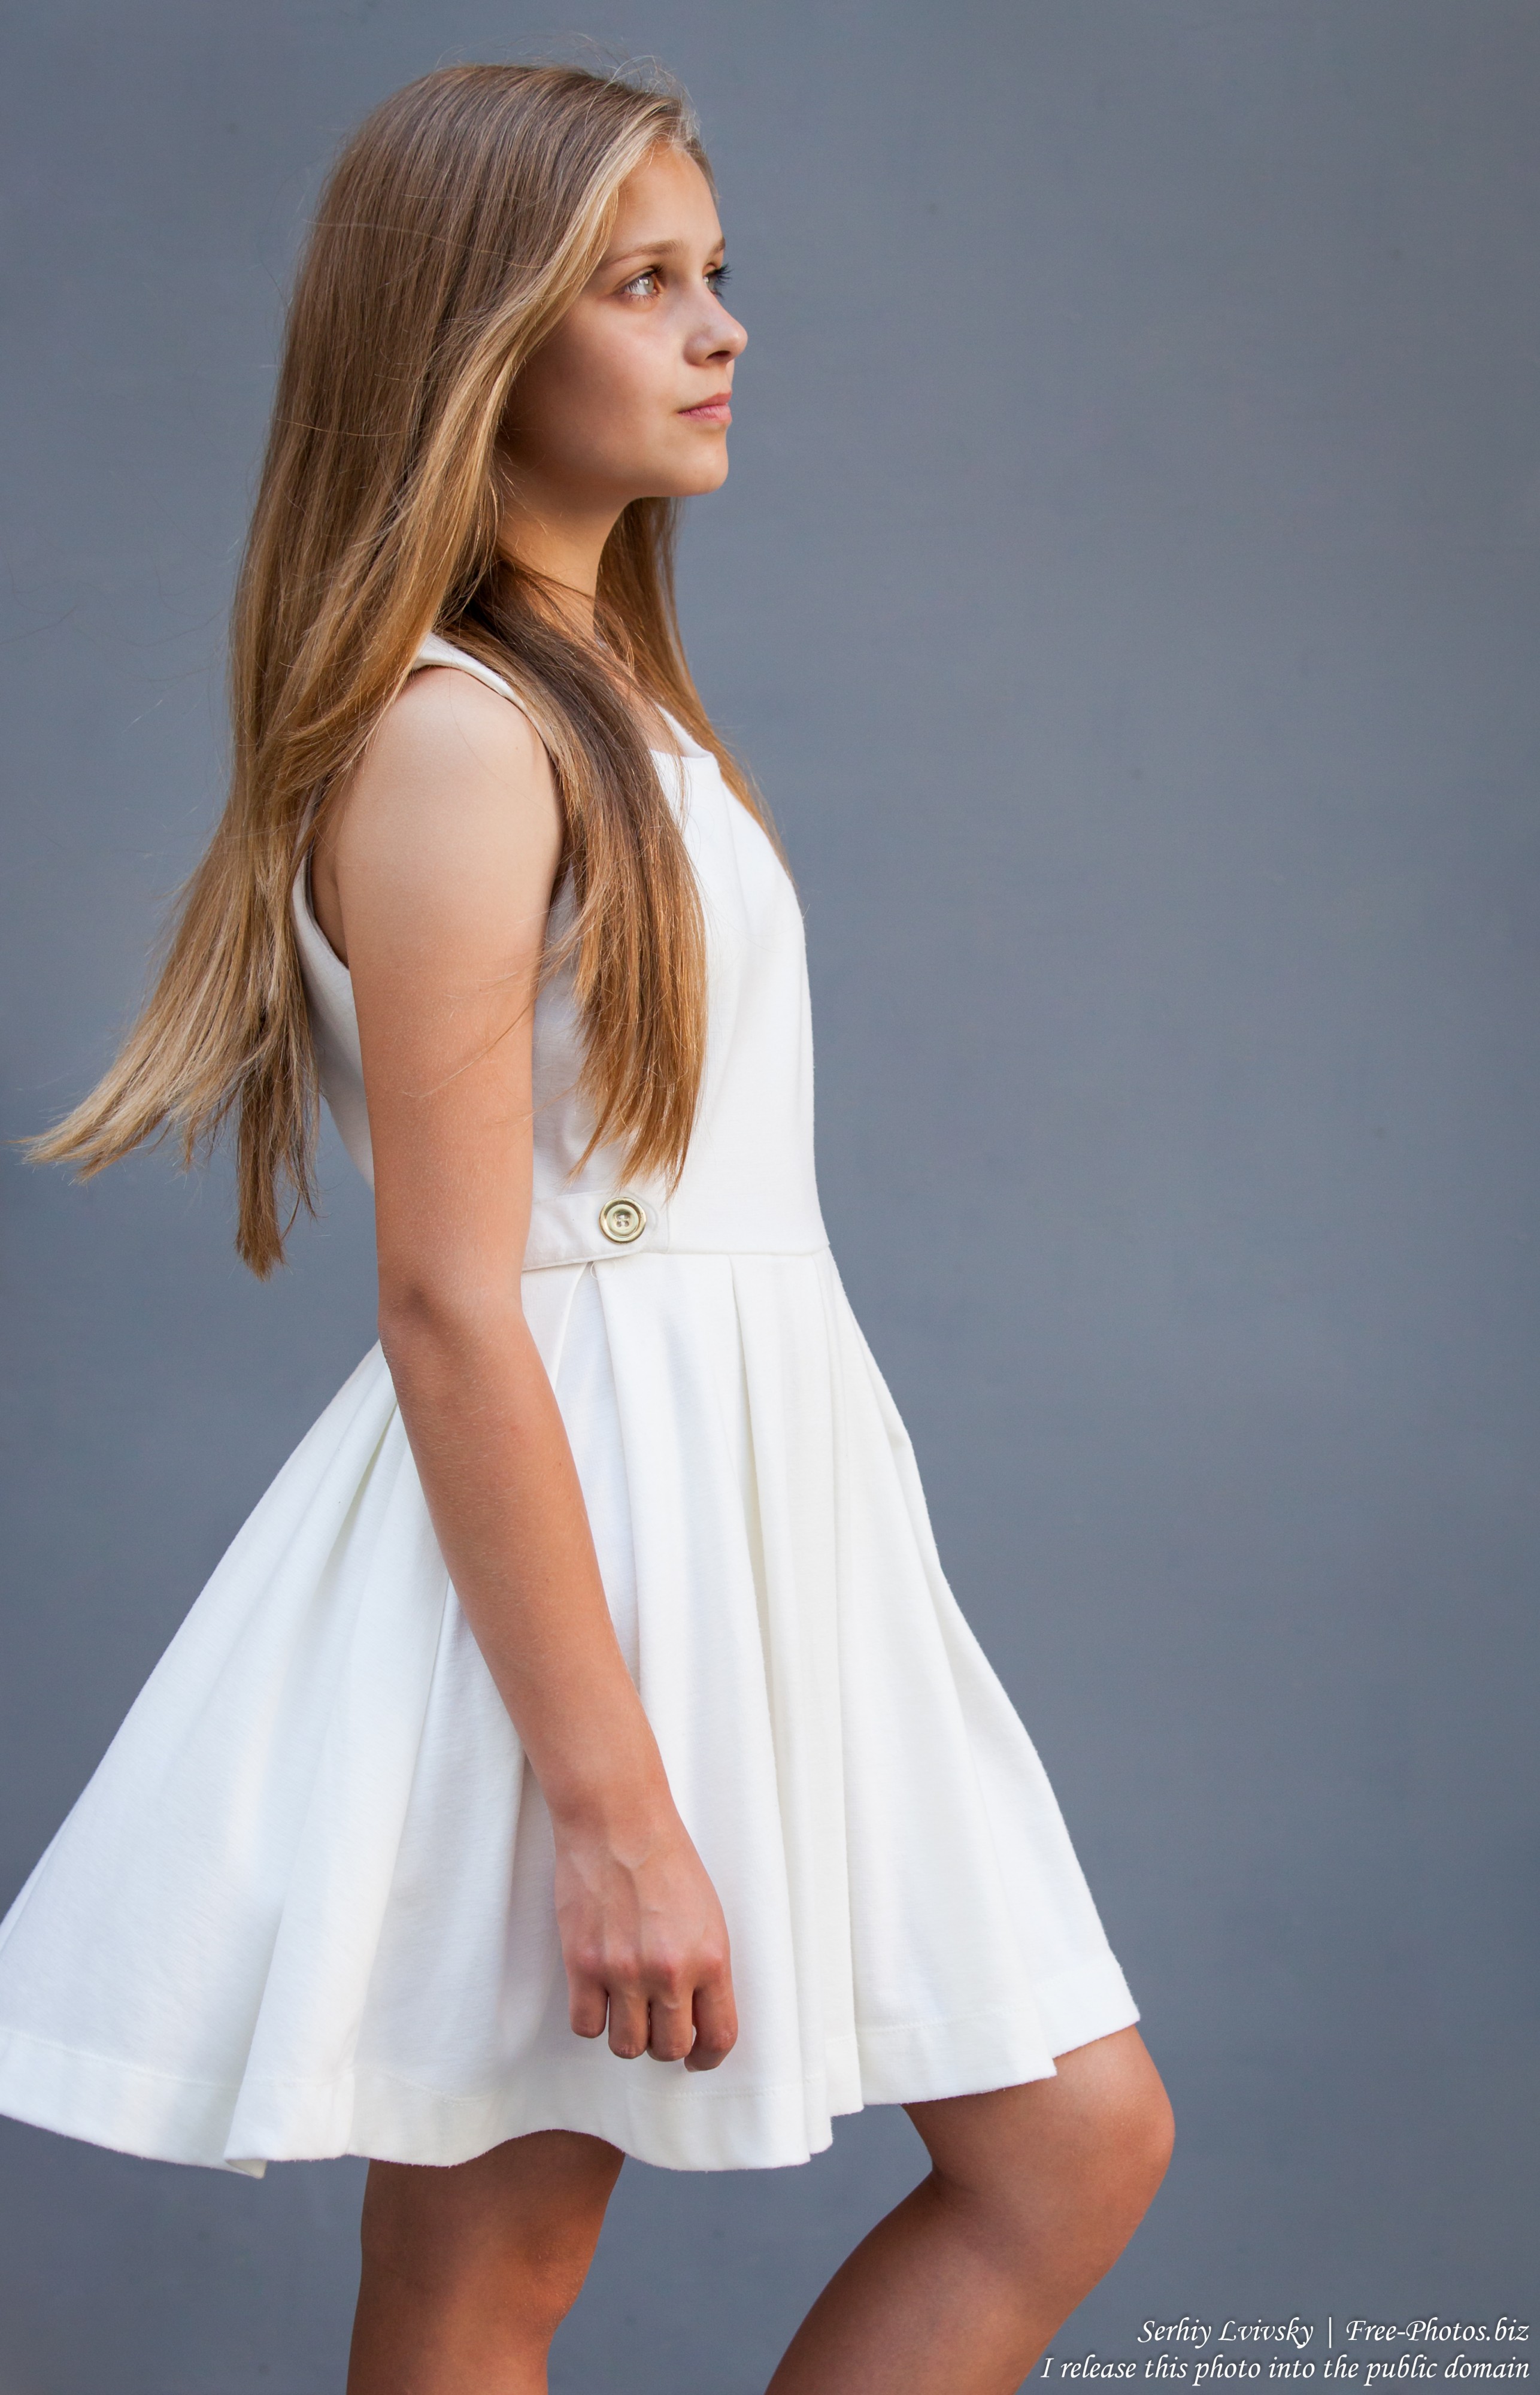 Photo Of A 12 Year Old Blond Girl Wearing A White Dress Photographed In